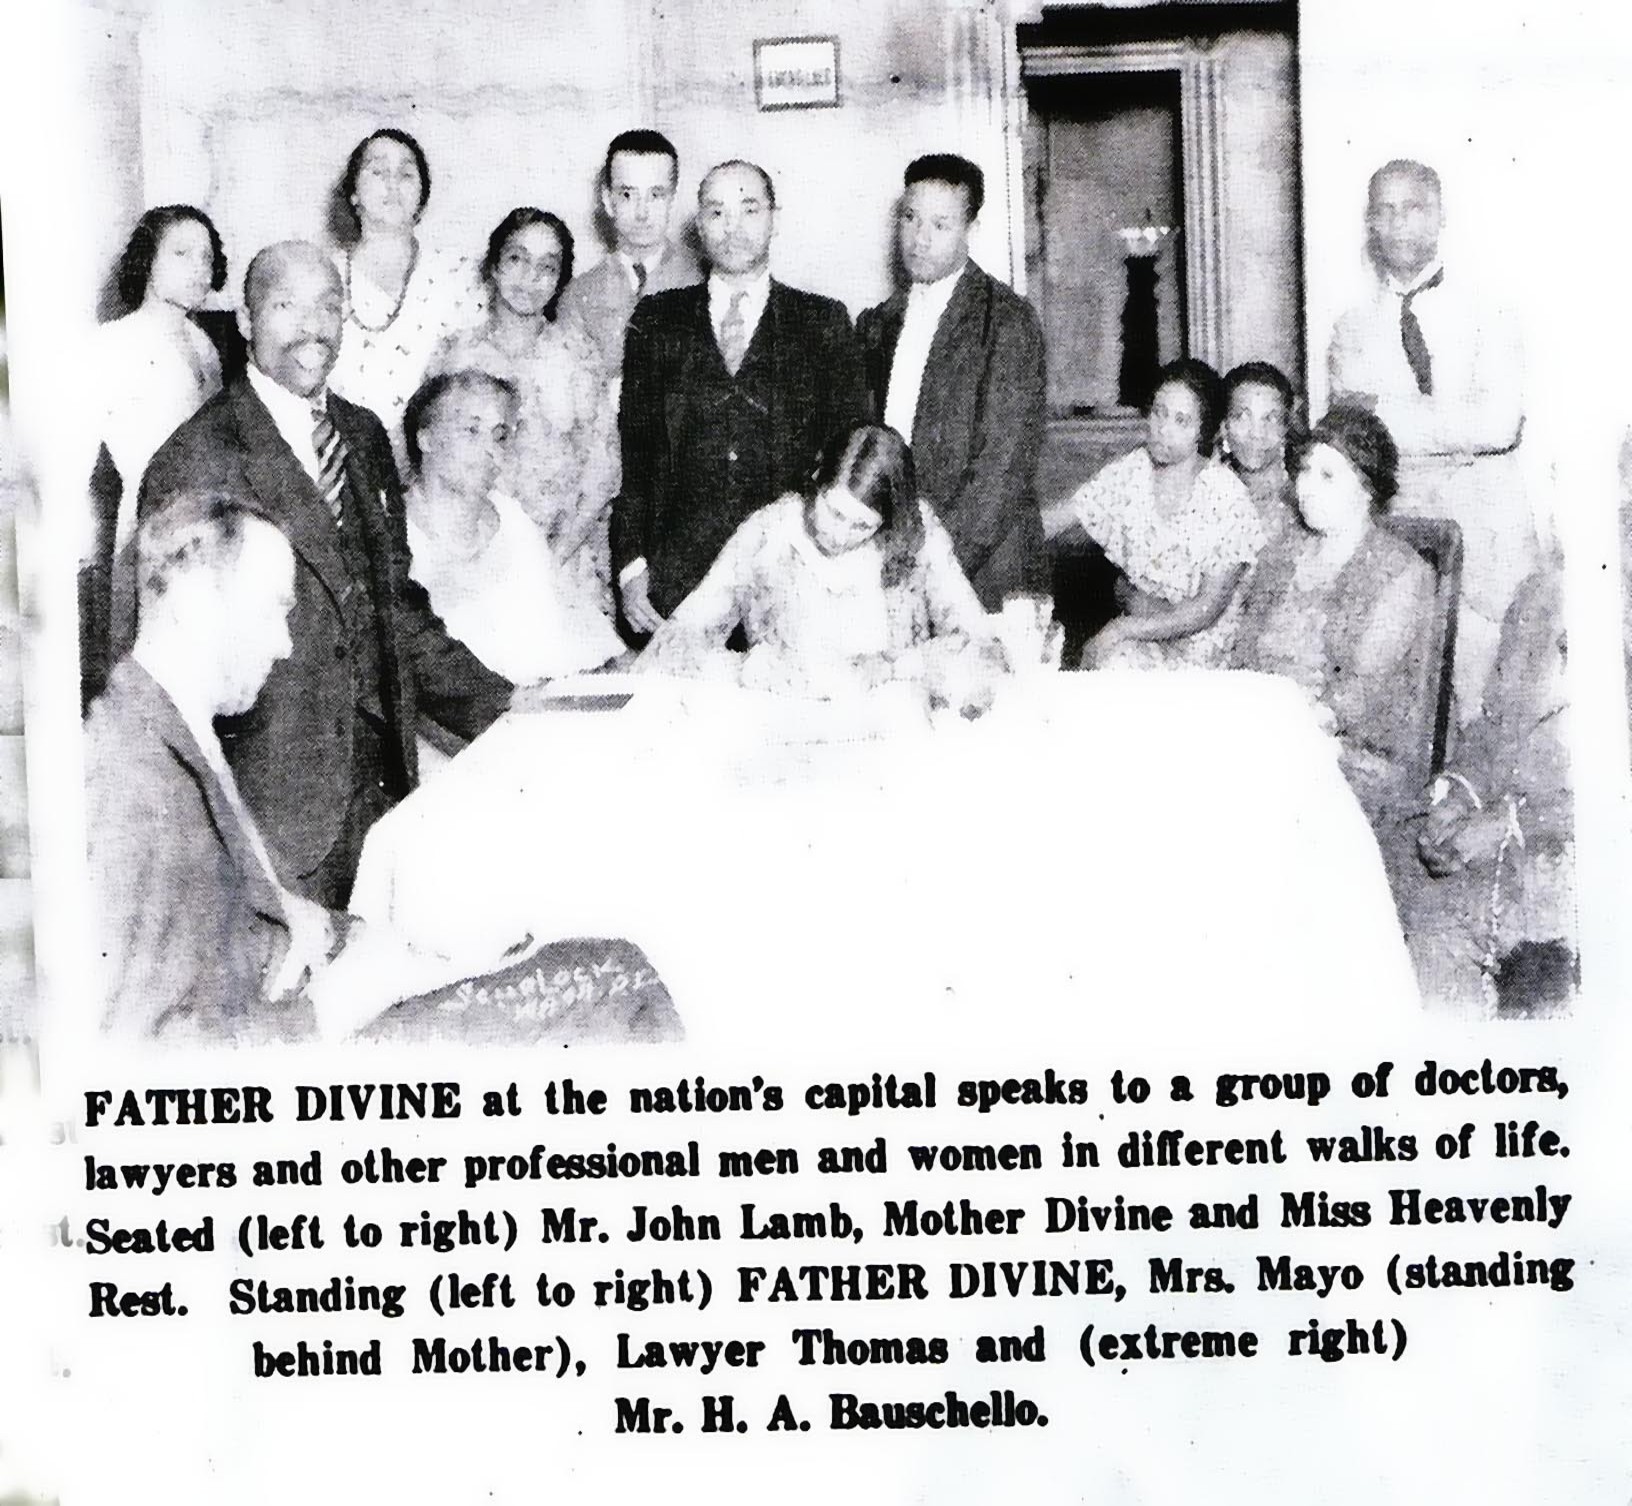 FATHER DIVINE
with a group in Washington, D. C.